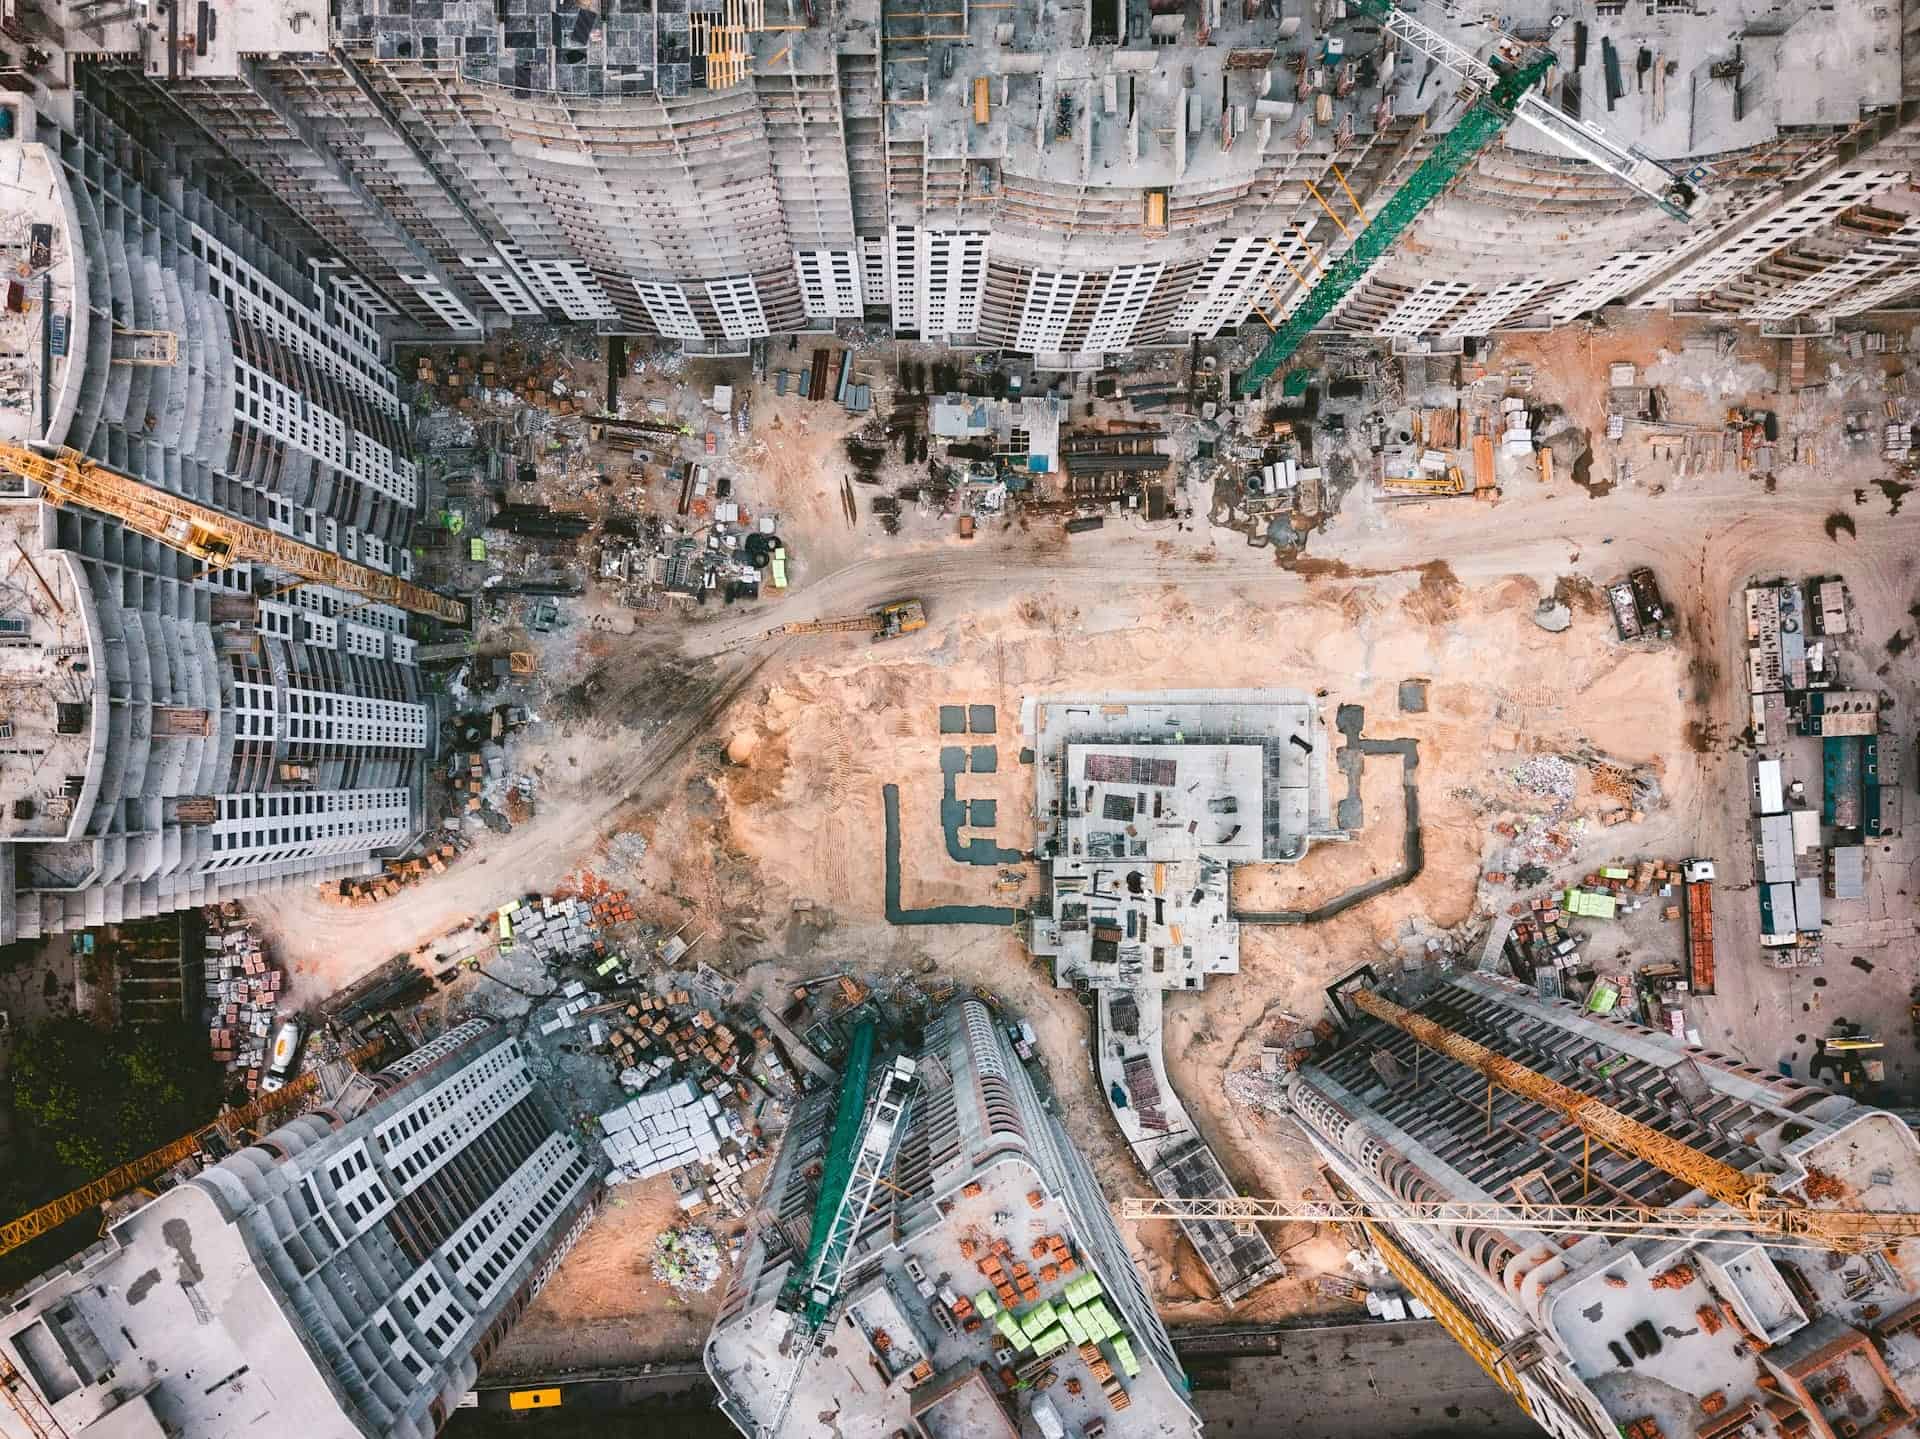 Bird's-eye view of buildings in construction